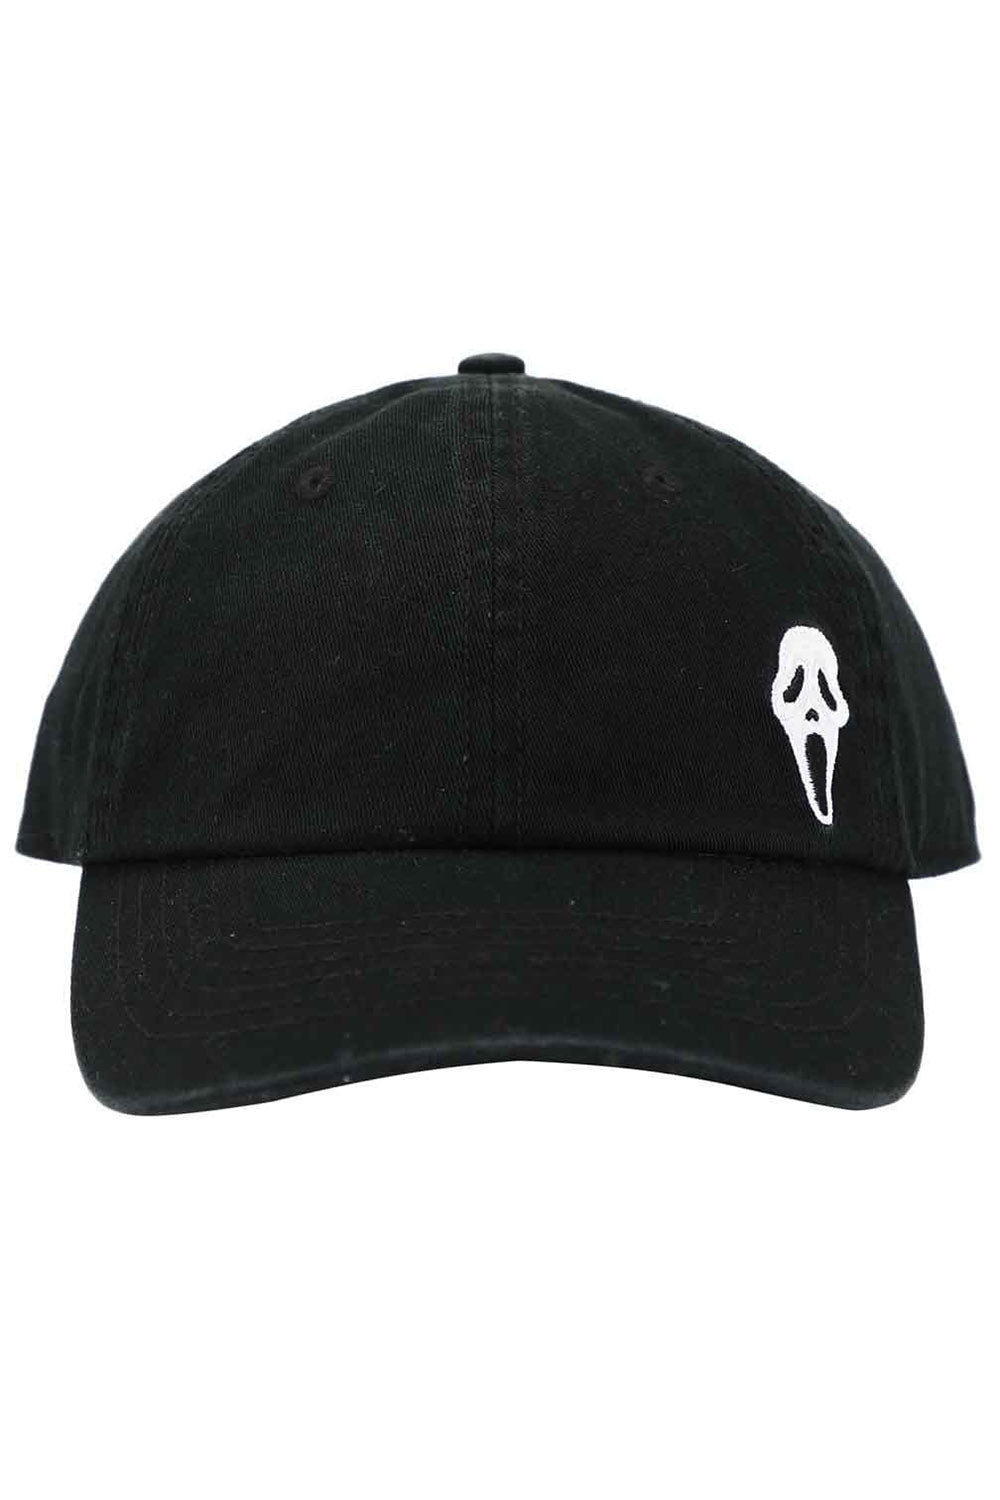 embroidered horror hat